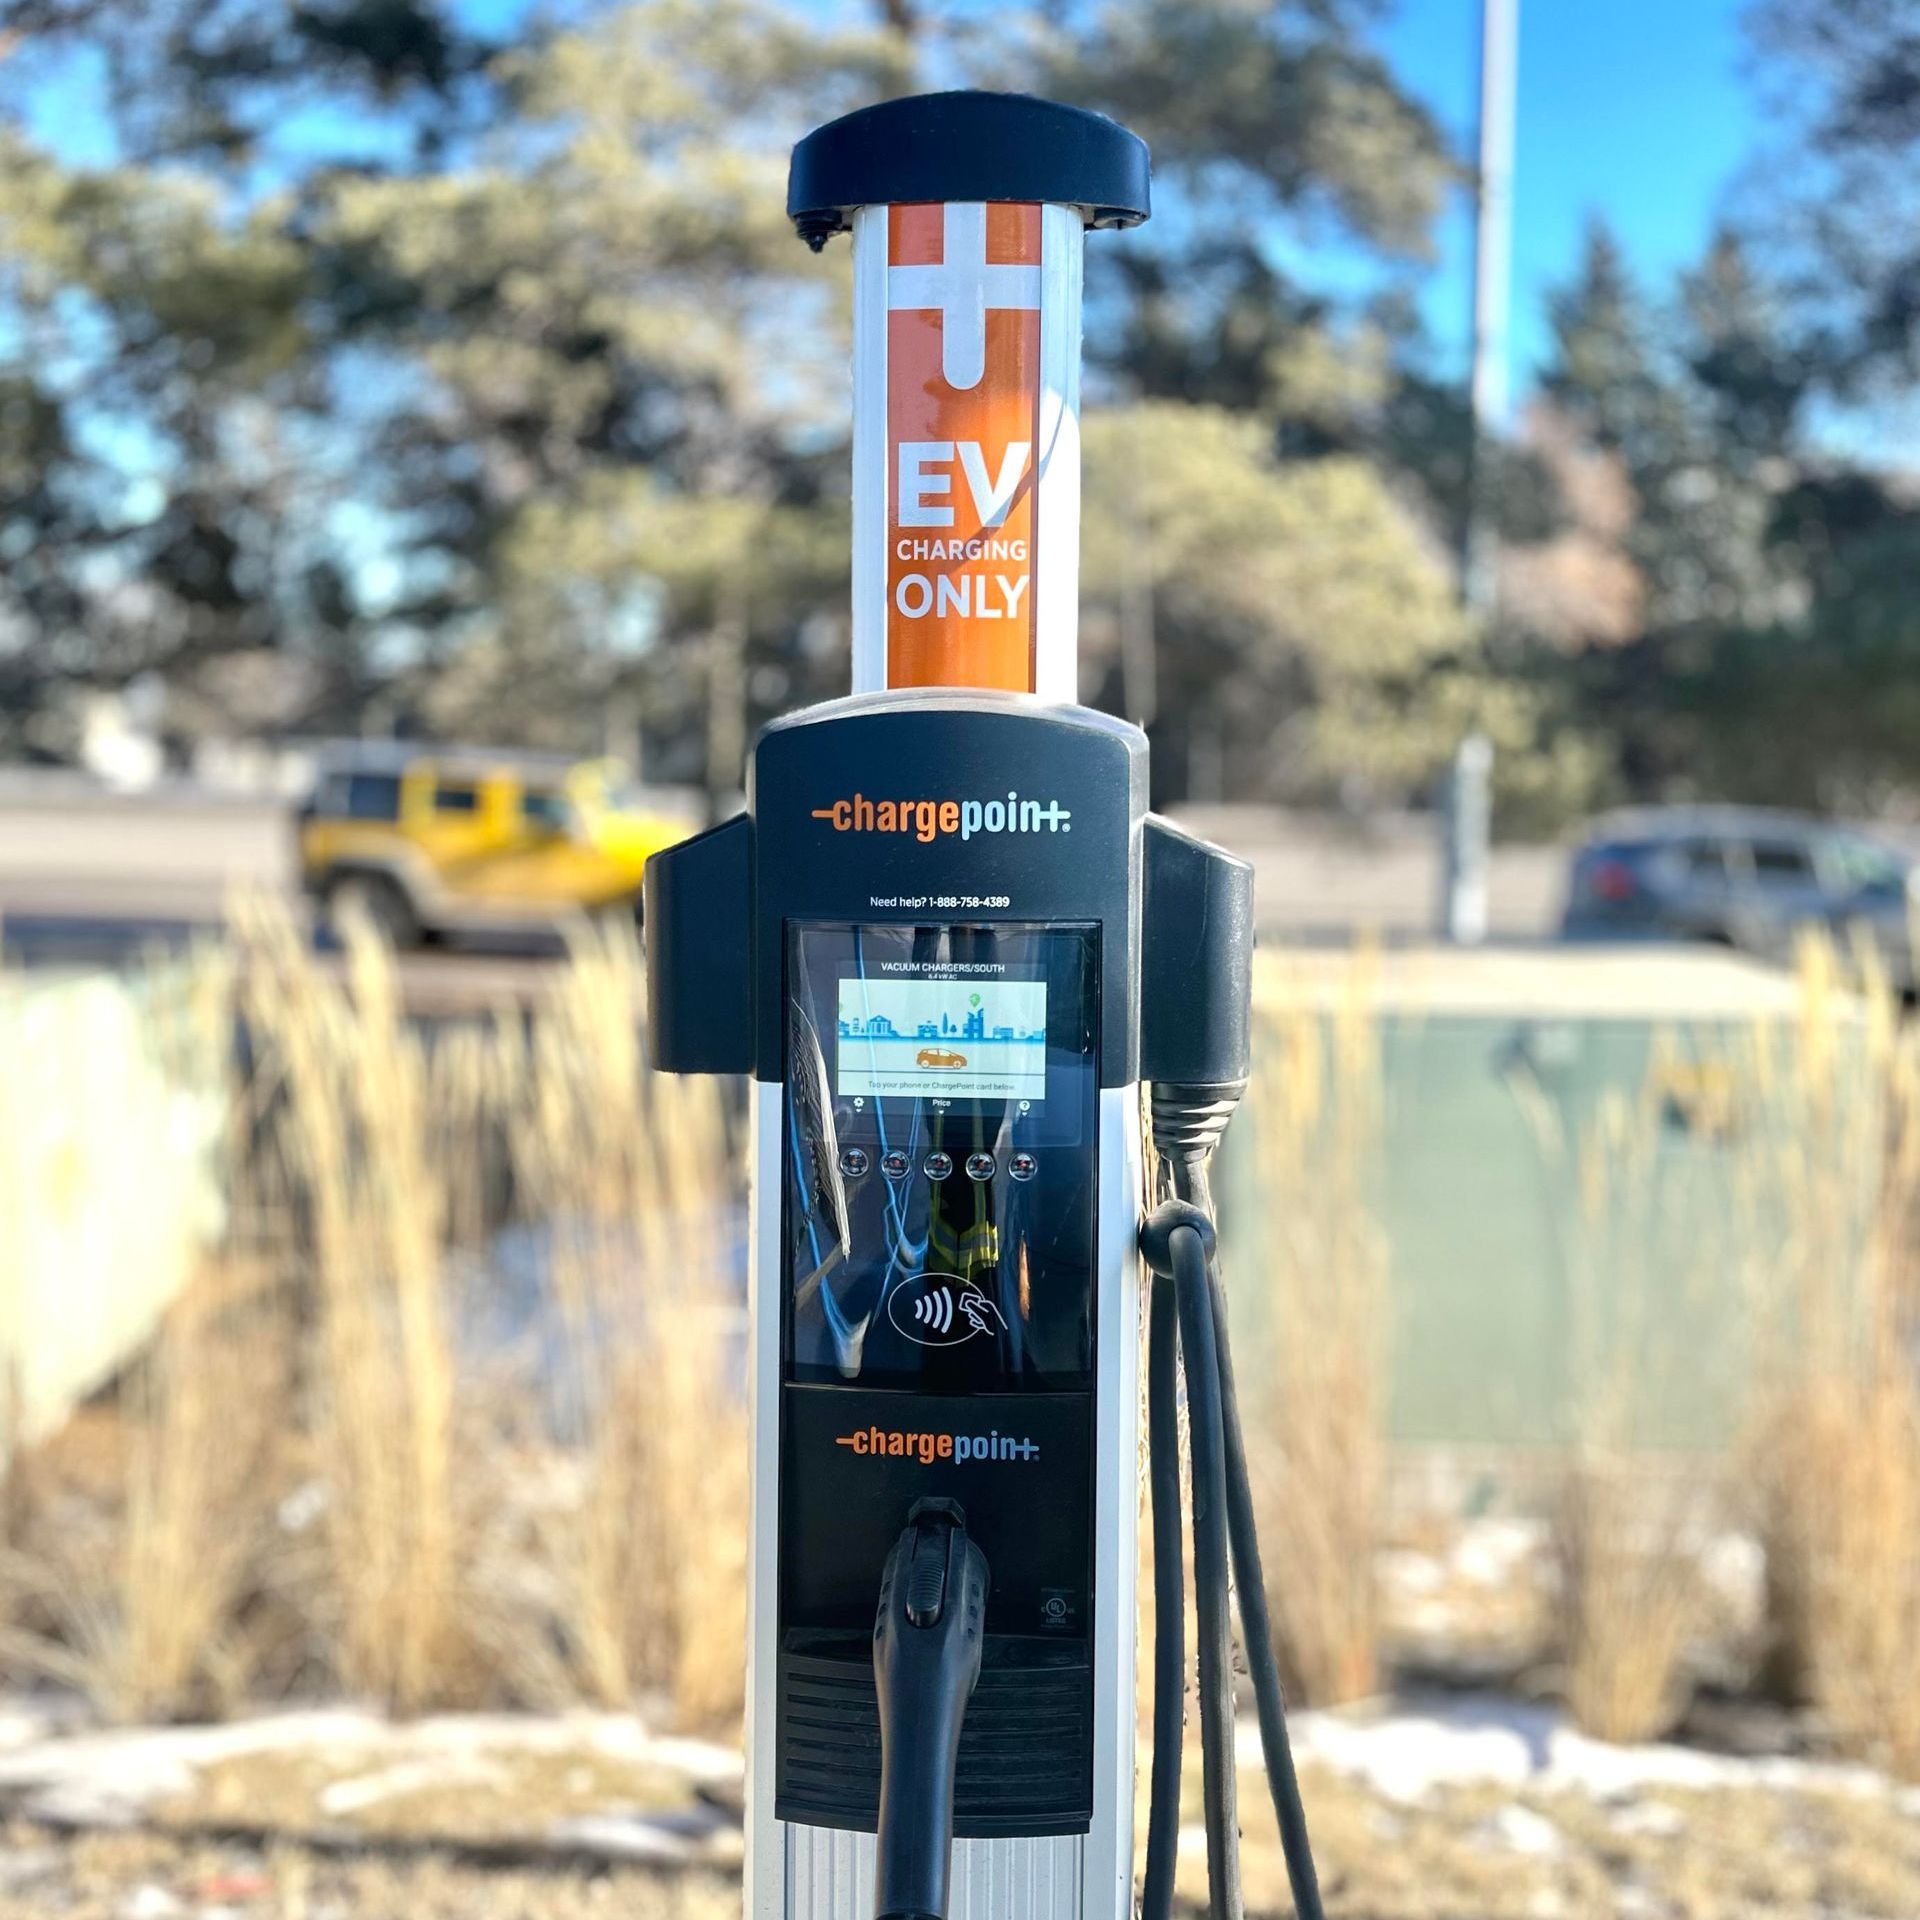 Sustainably clean clearwater carwash ev charging station